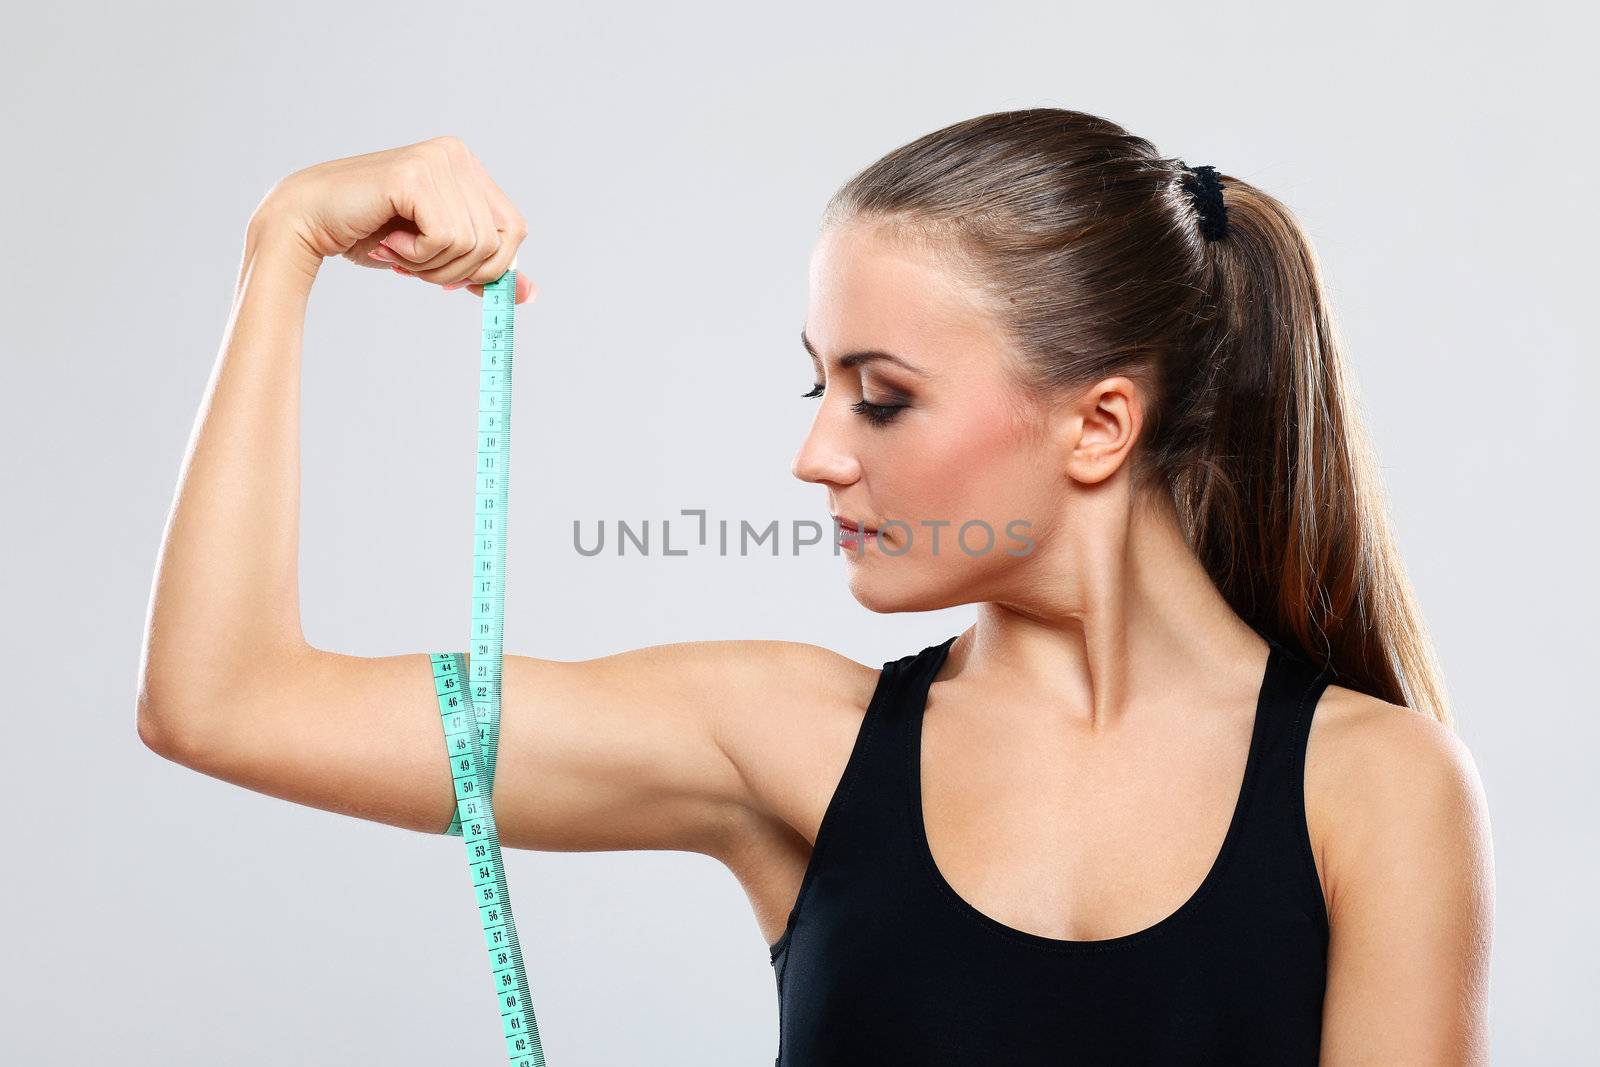 Beautiful girl measure her biceps with a  ruler by rufatjumali